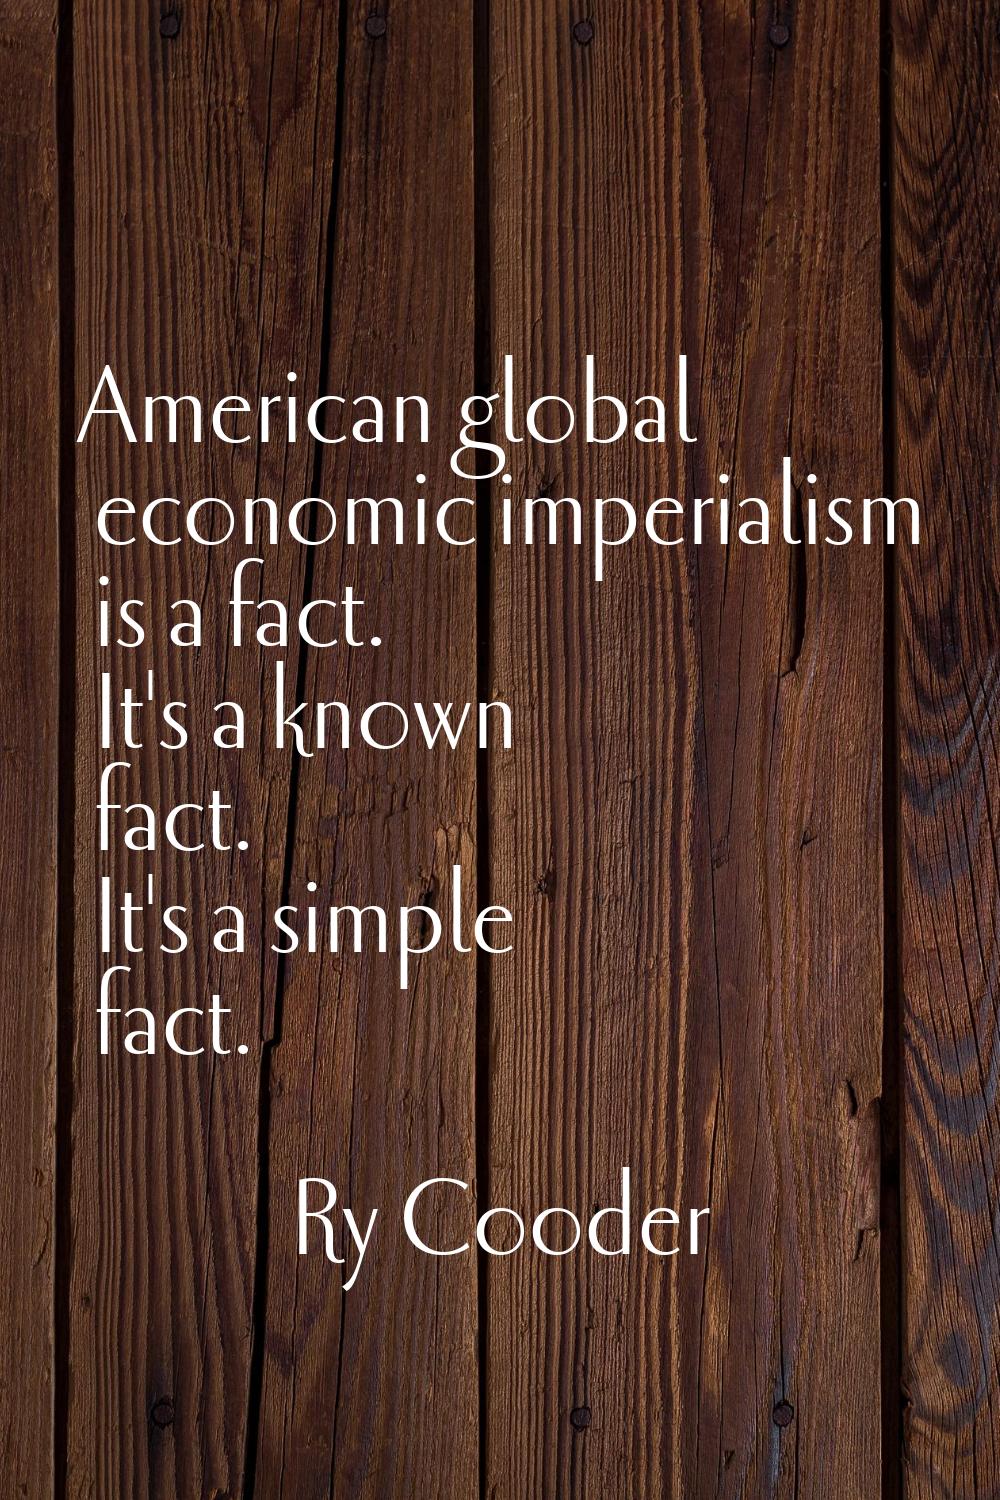 American global economic imperialism is a fact. It's a known fact. It's a simple fact.